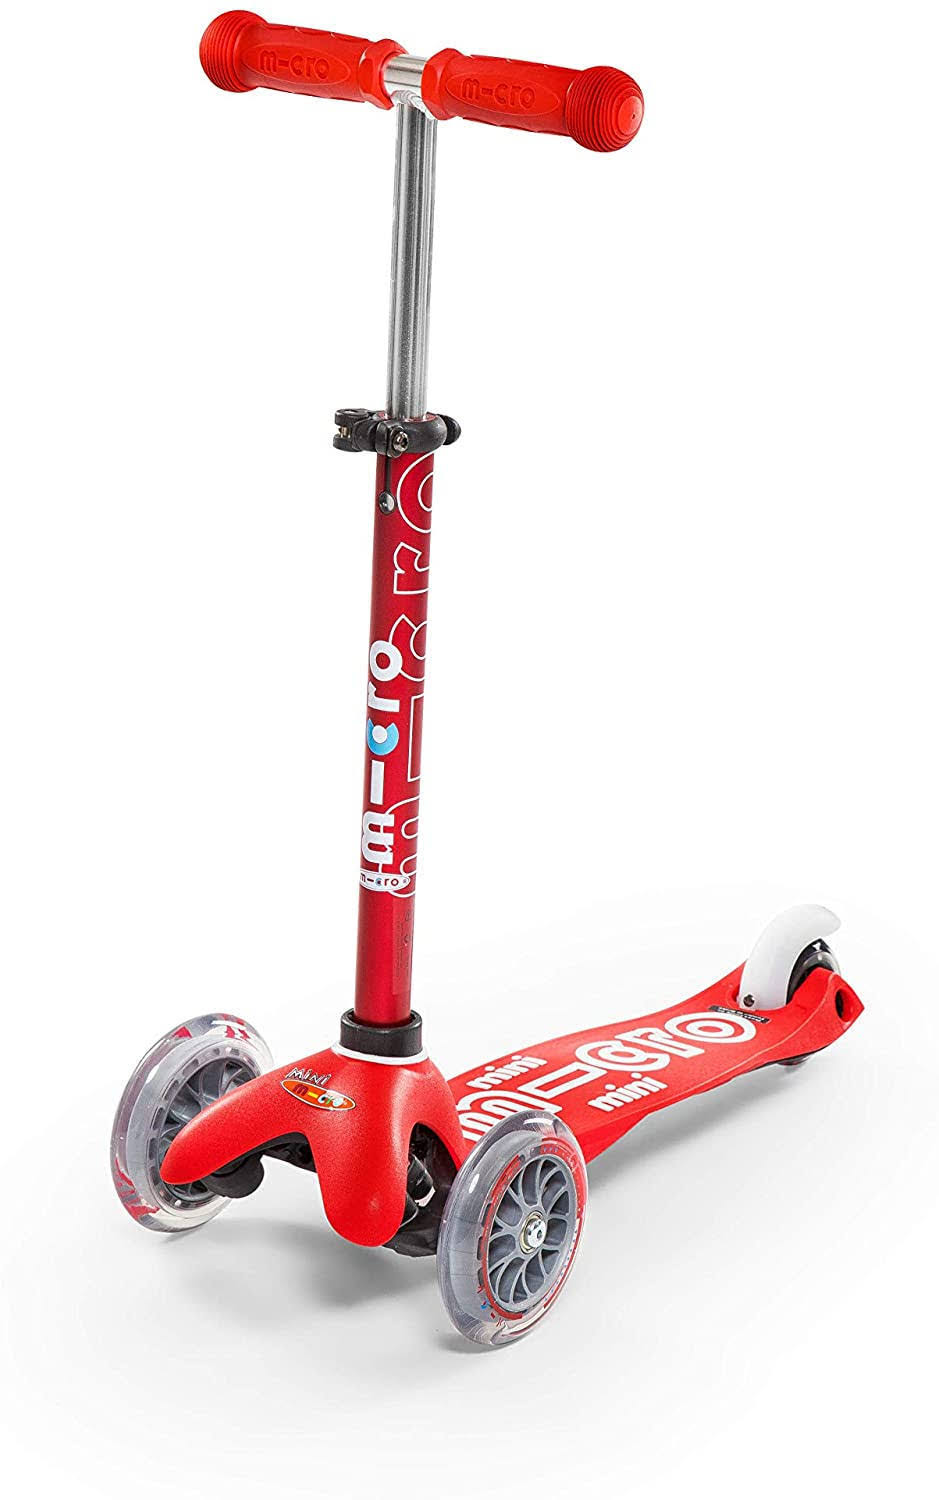 Micro Mini Deluxe Kids Scooter - Red, 3 Wheel